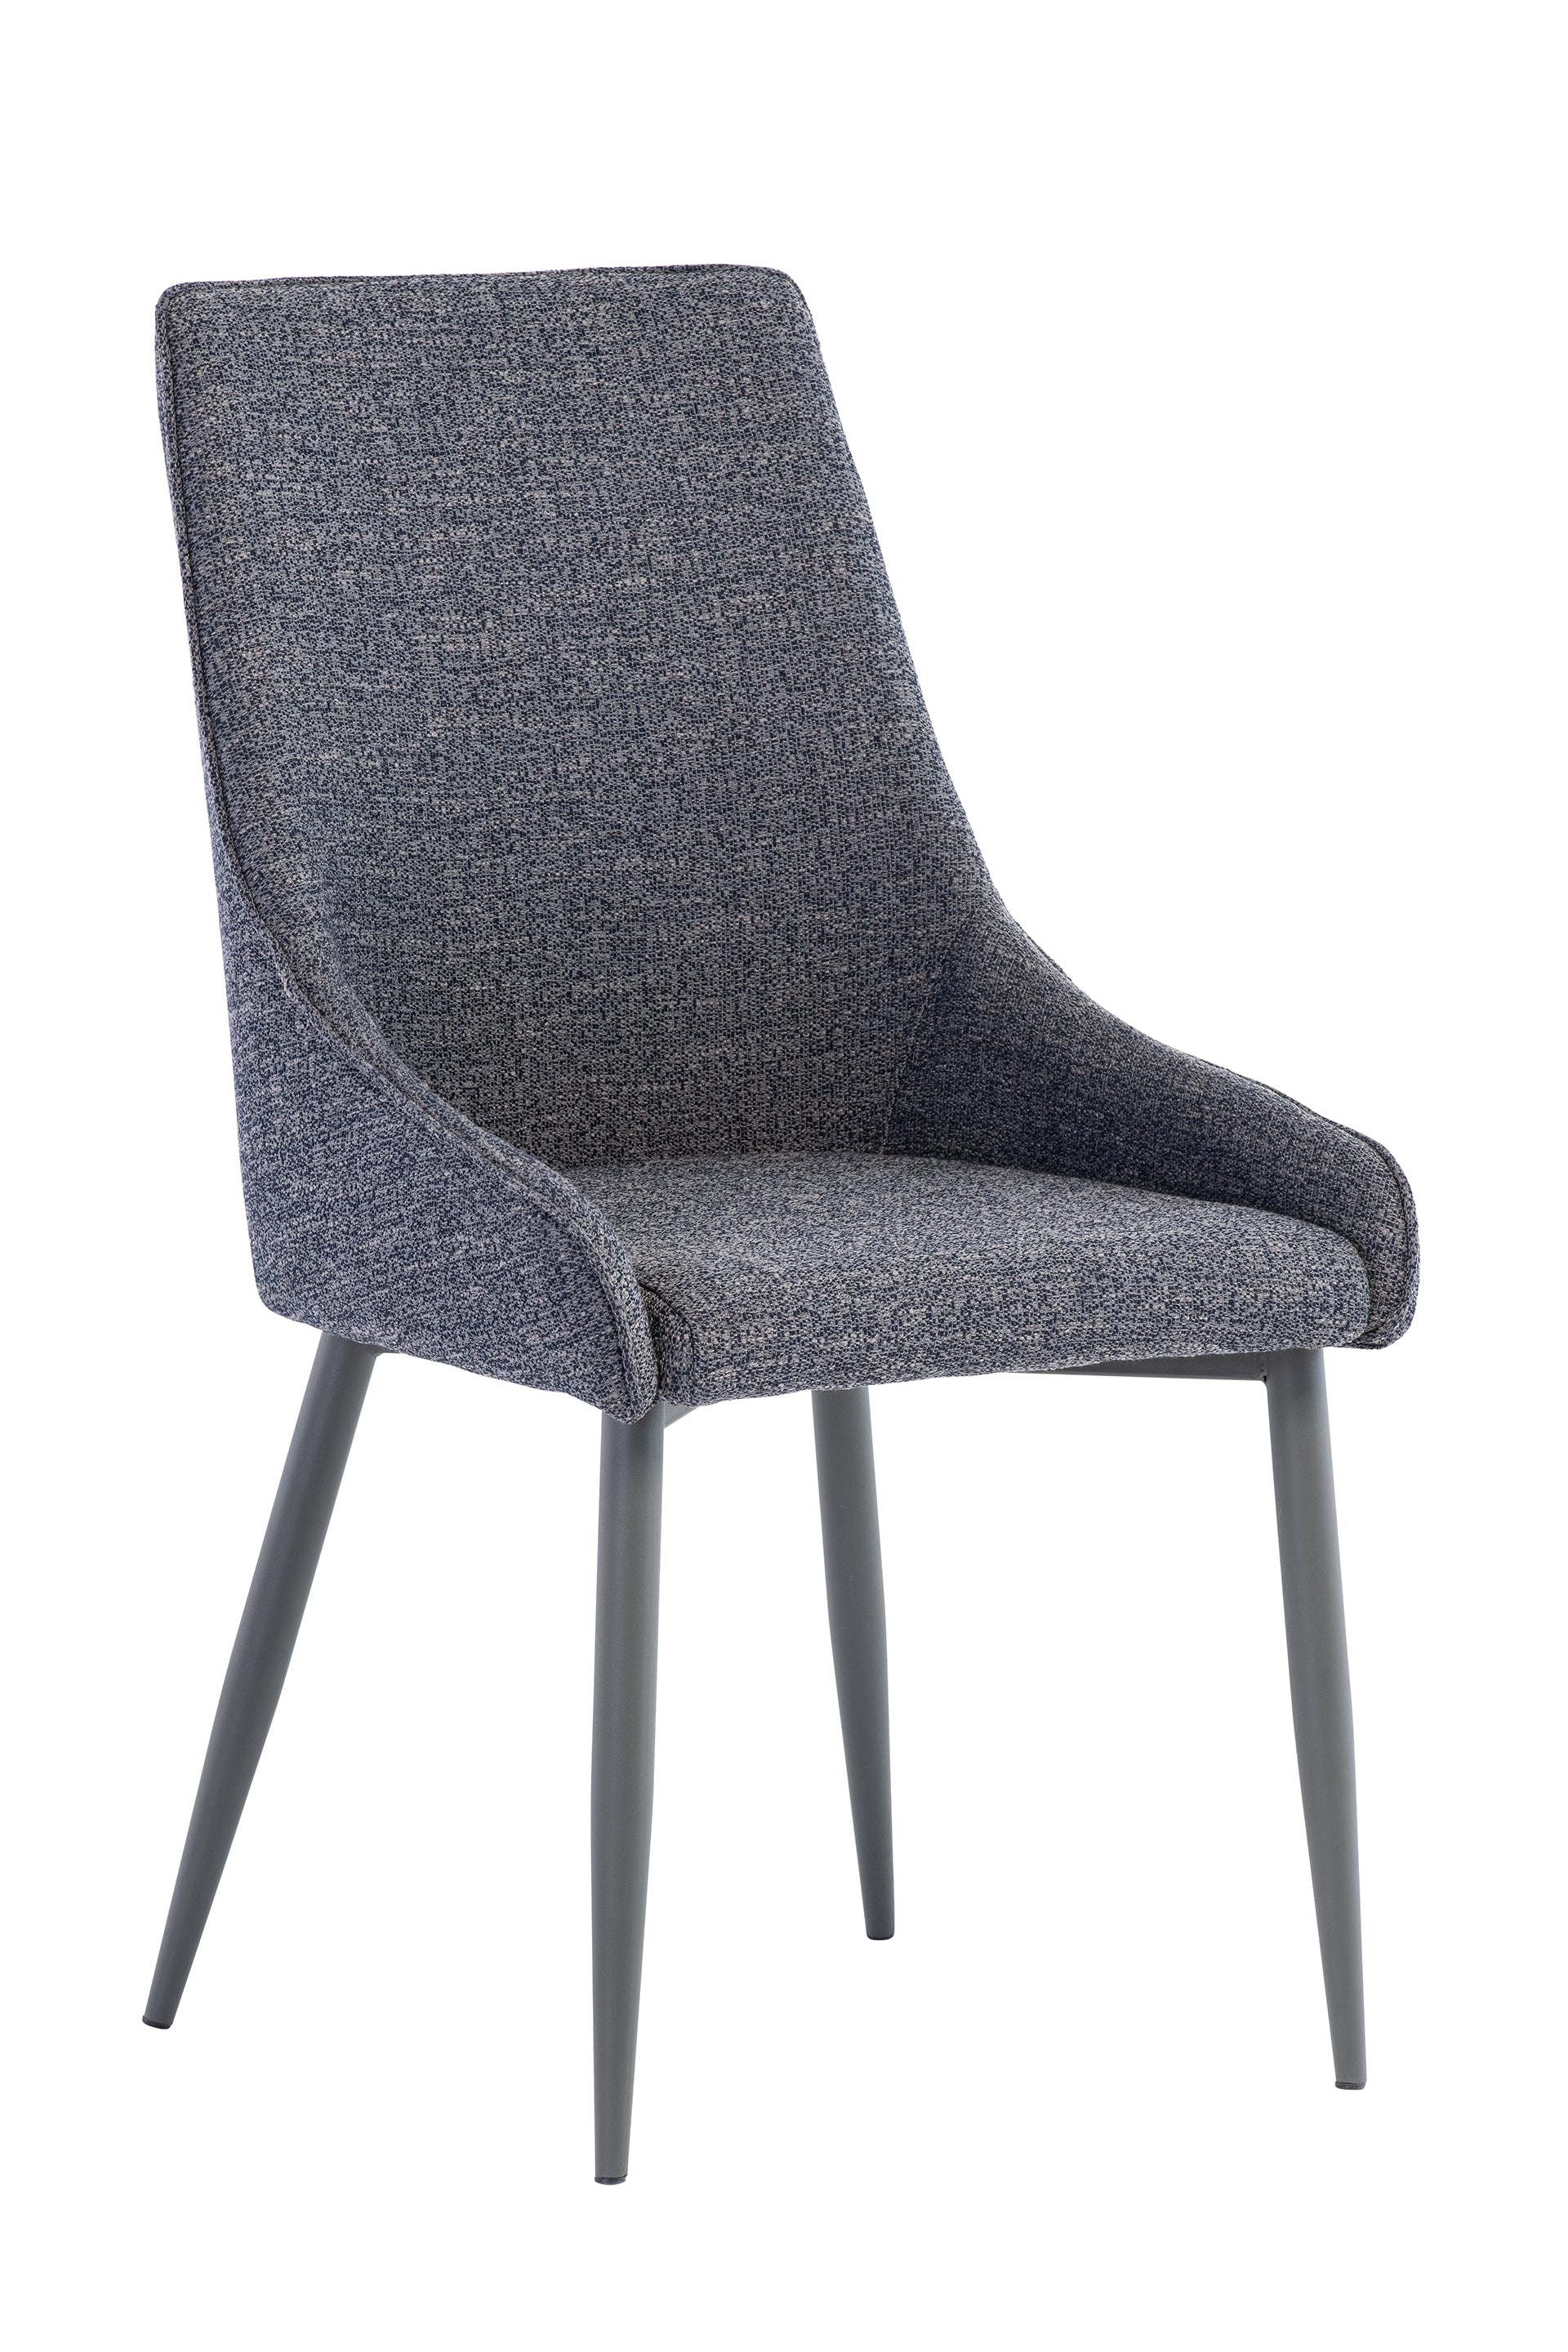 Rimbach Dining Chair (Pairs), Grey/Blue Fabric – Lc Living